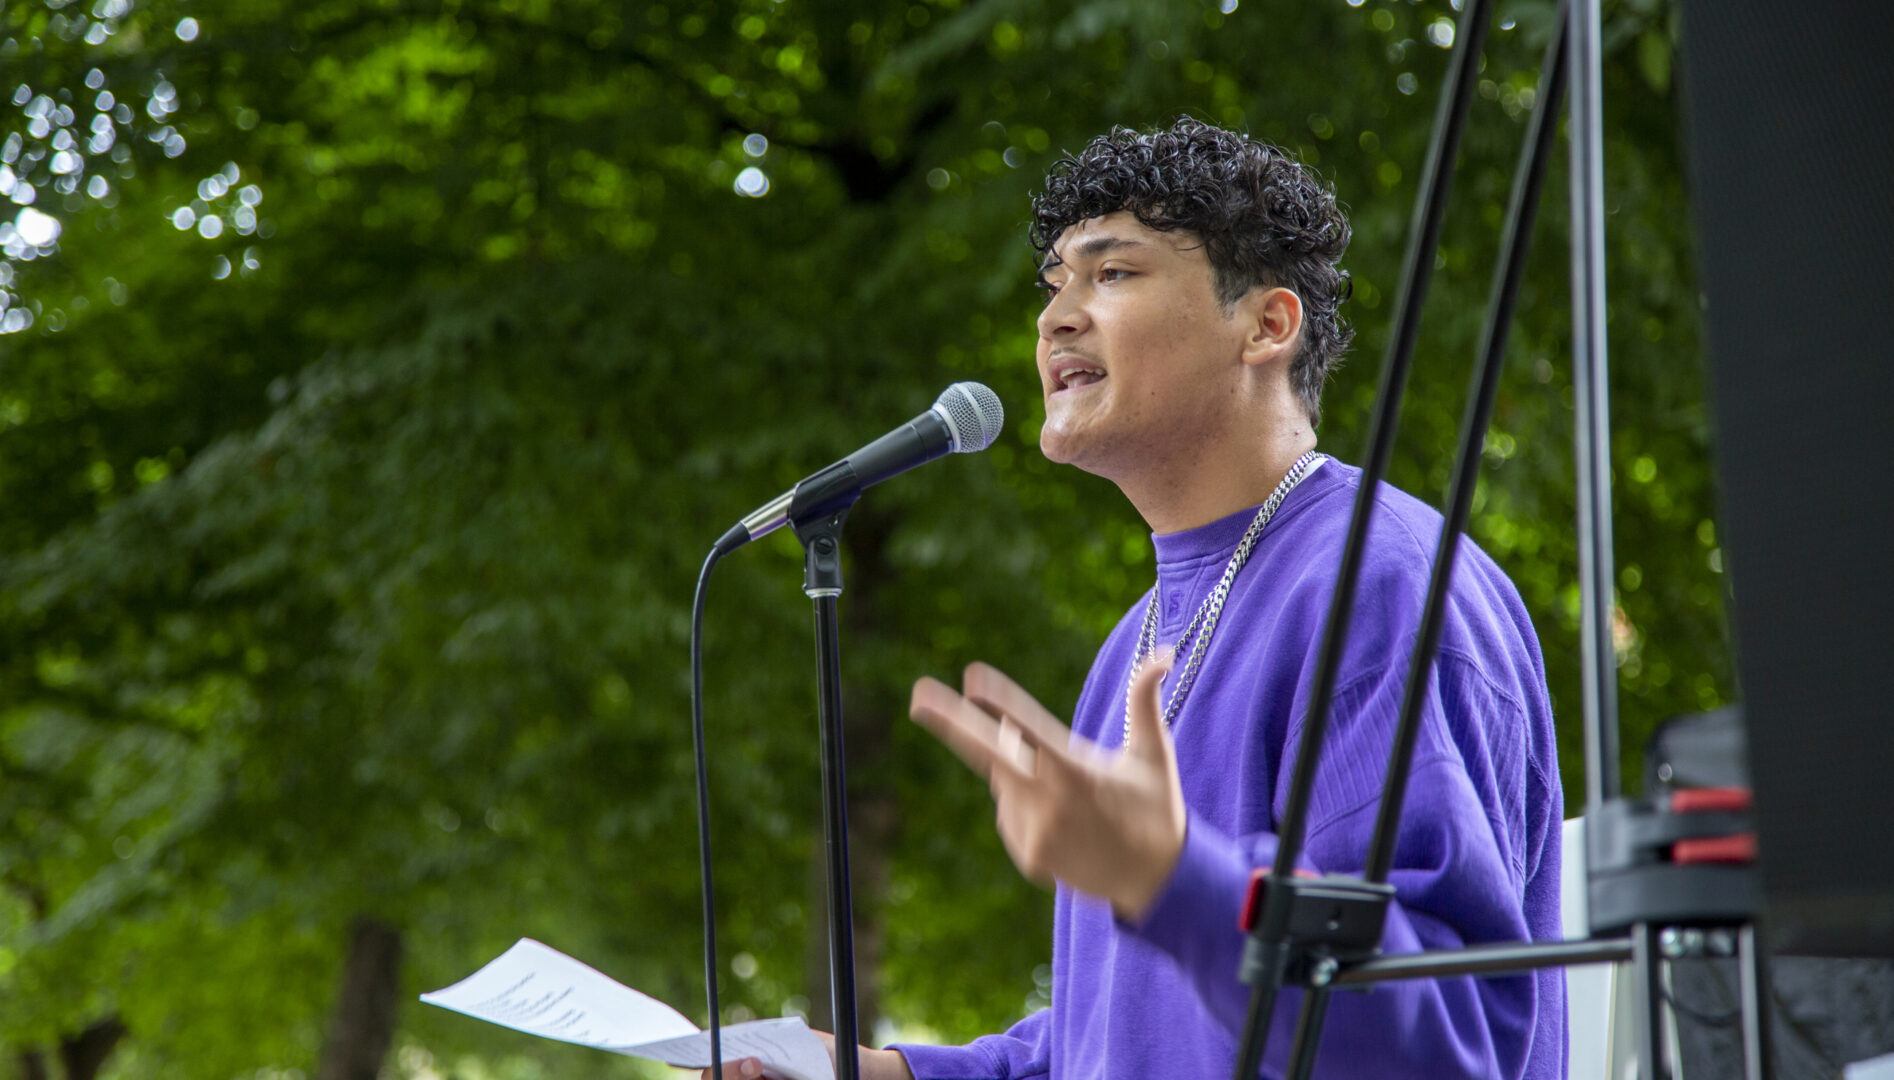 A man in a purple sweatshirt speaking at a microphone under a tree